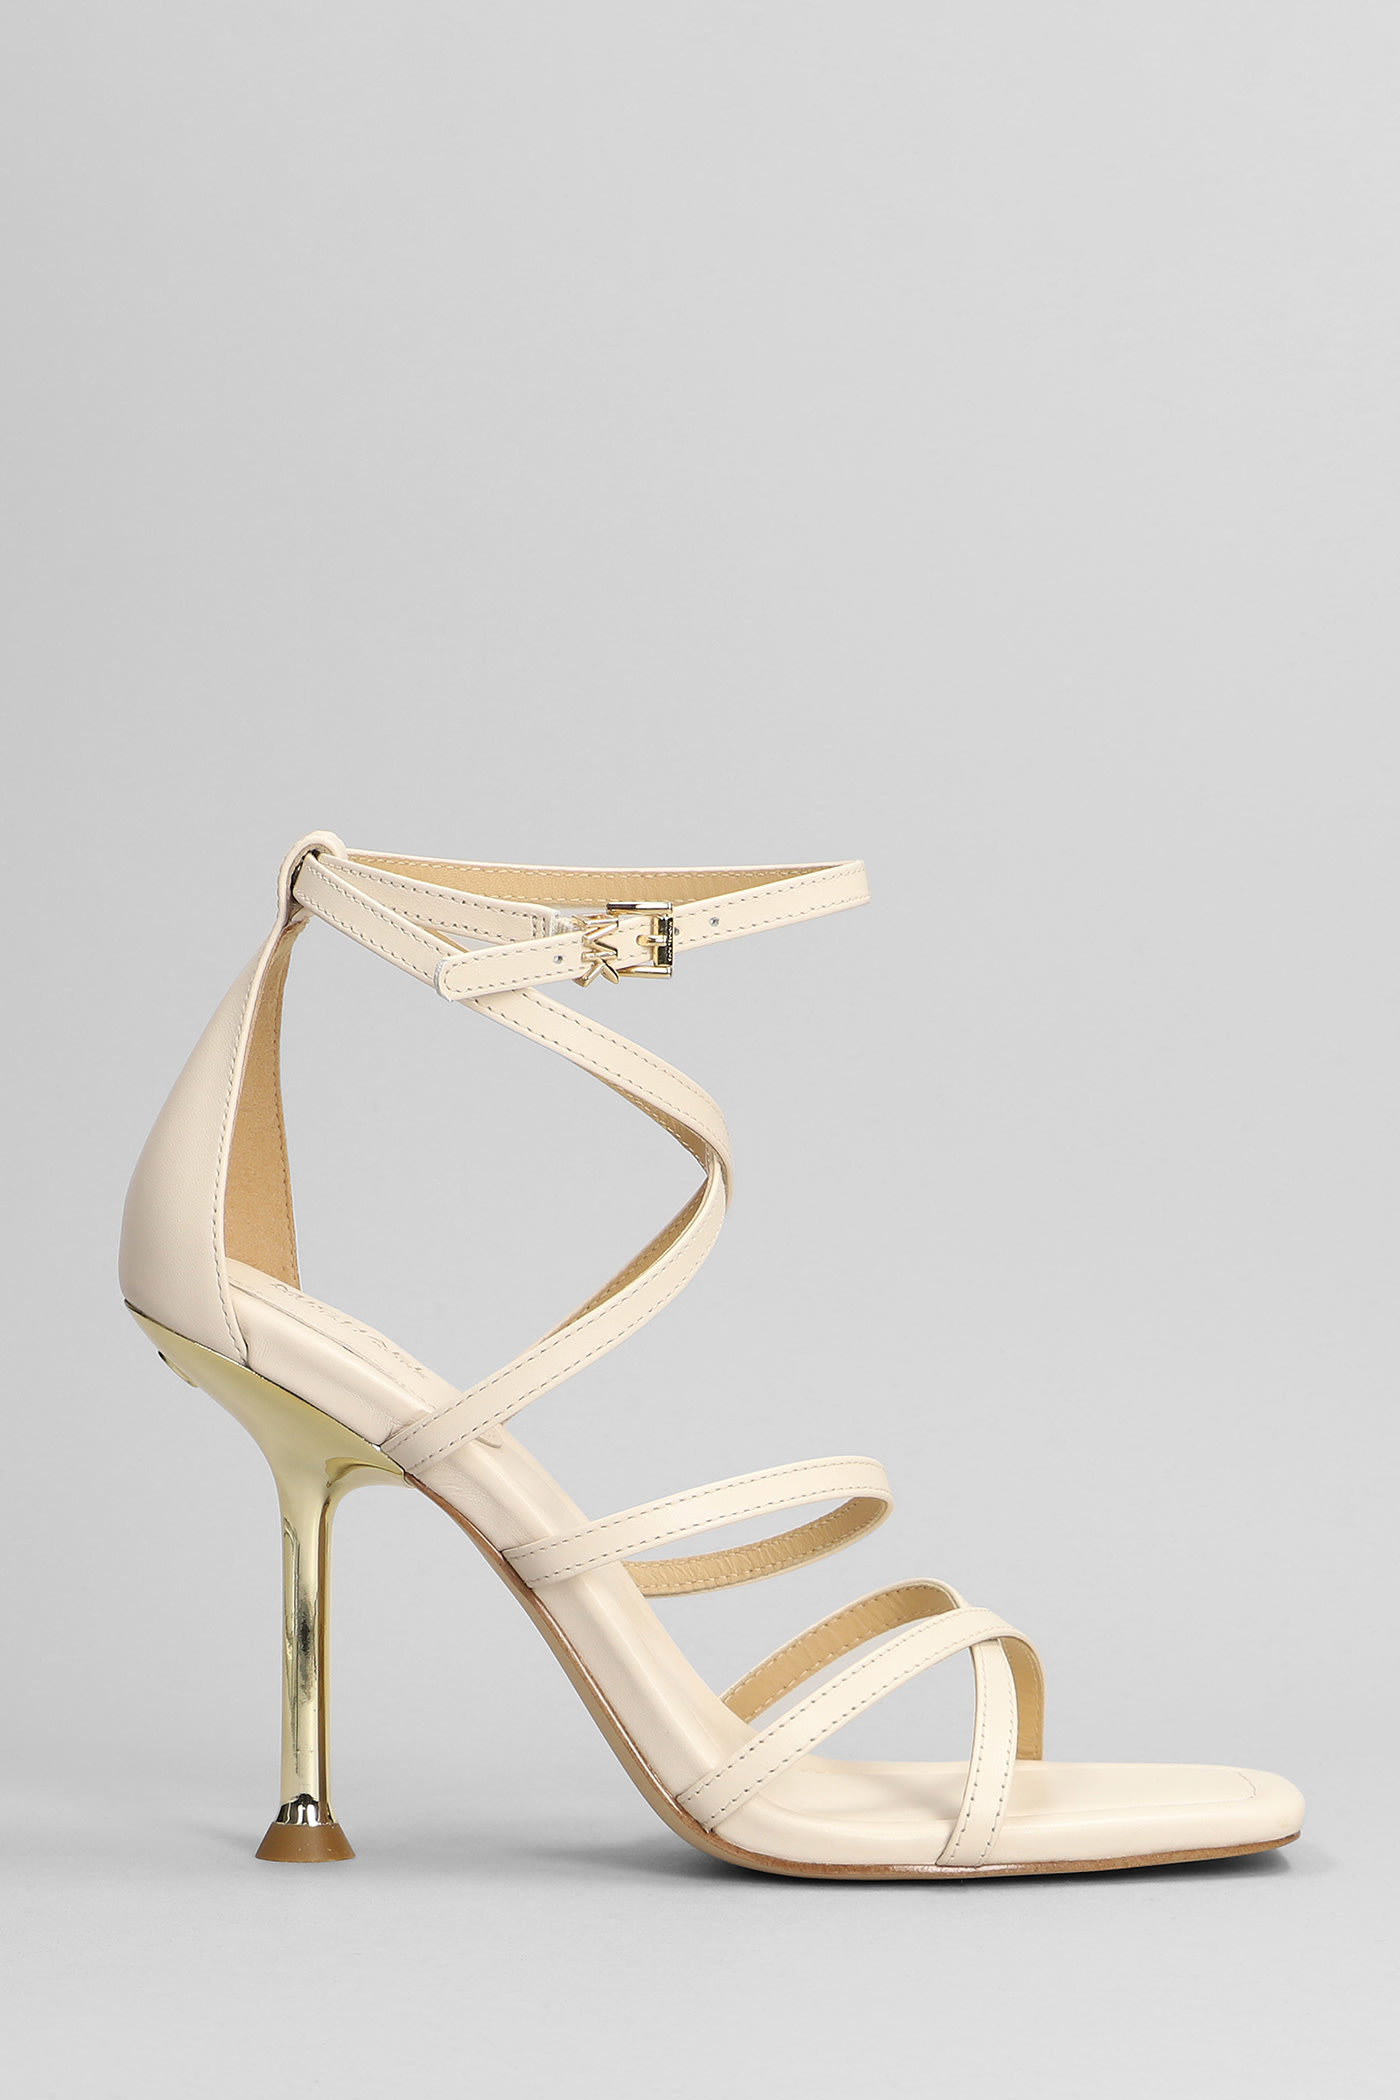 Michael Kors Imany Strap Sandals In Beige Leather